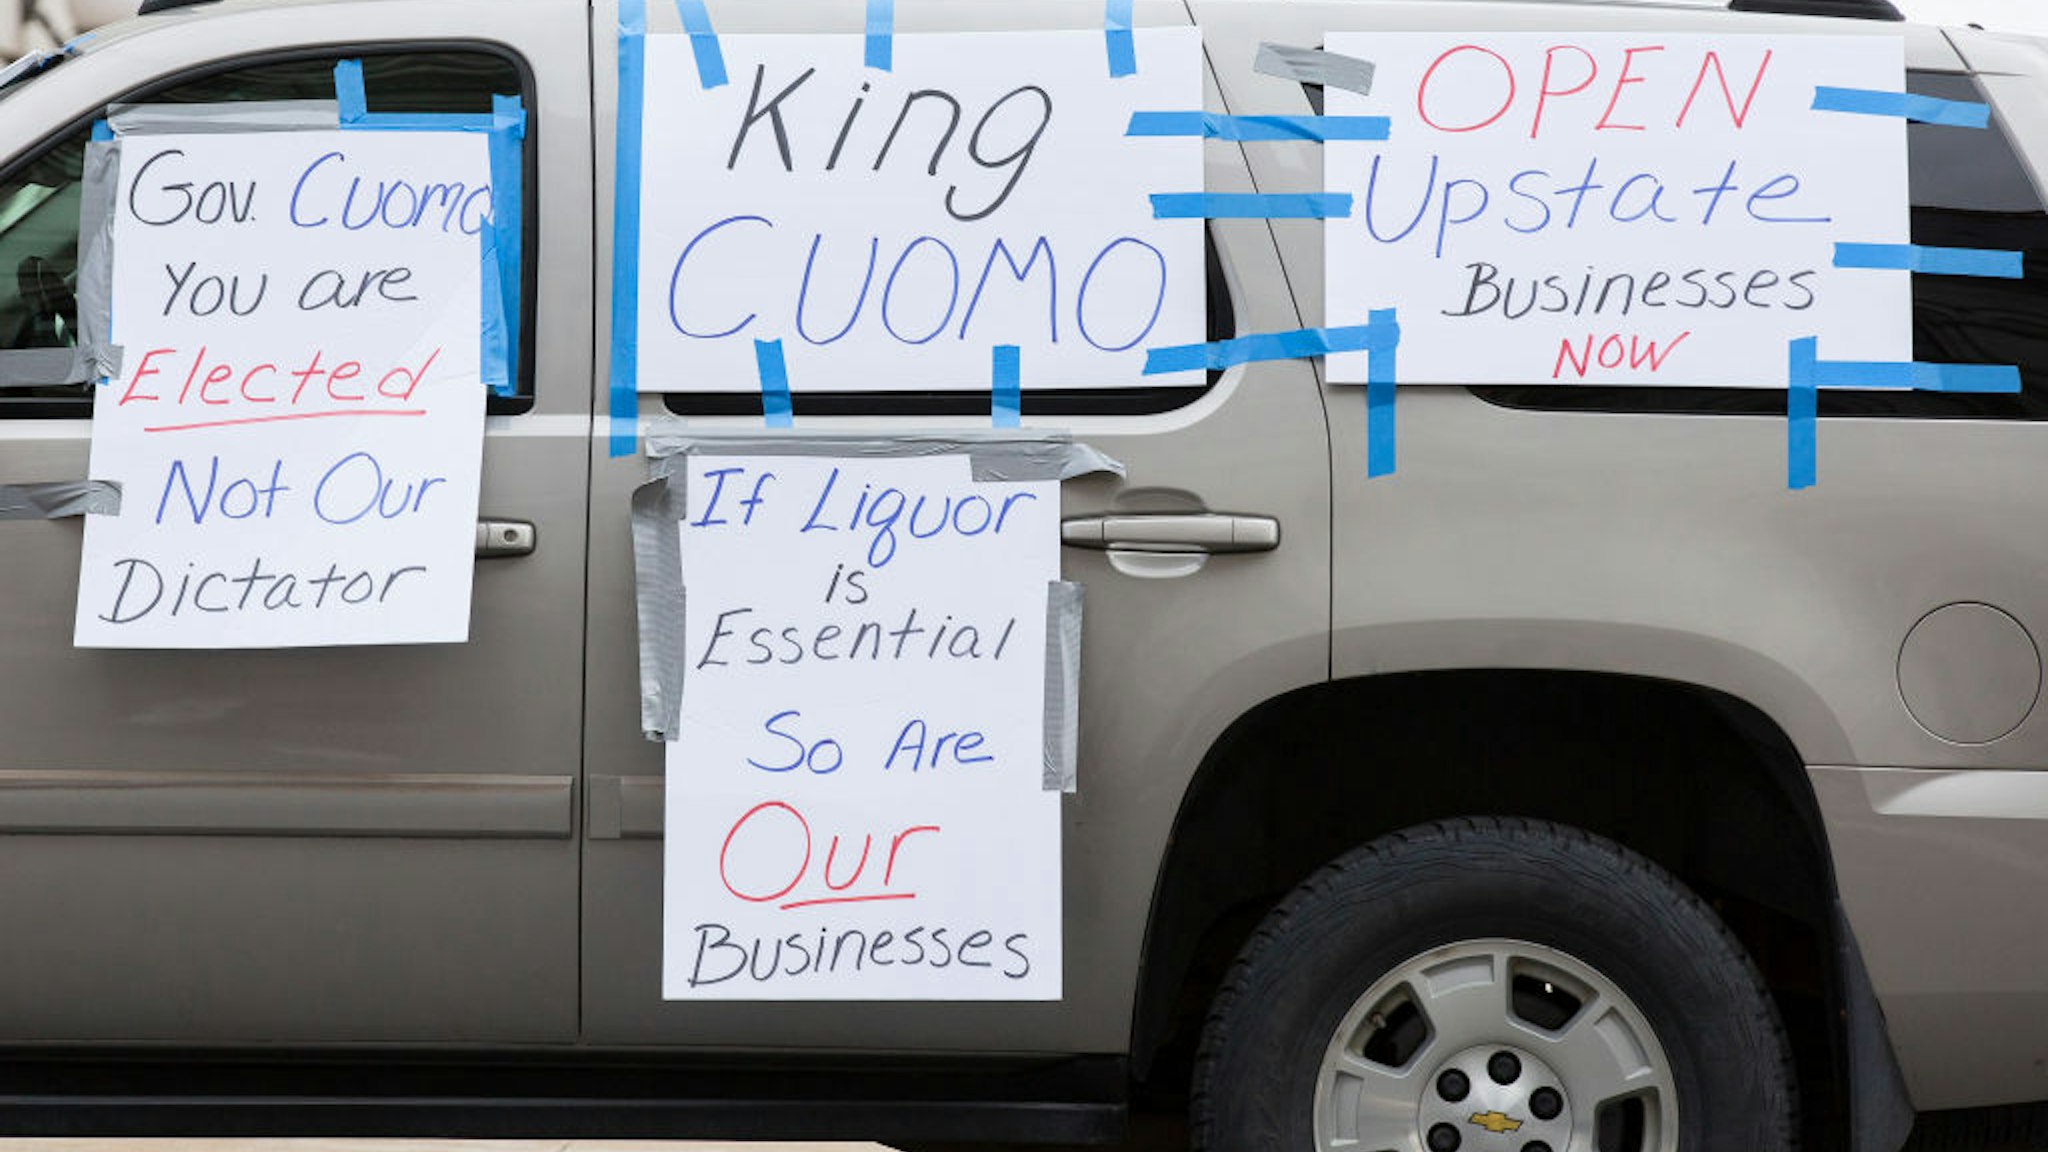 ALBANY, NY - APRIL 22: A vehicle is covered in signs criticizing New York State Governor Andrew Cuomo during an Operation Gridlock protest outside of the New York State Capitol Building on April 22, 2020 in Albany, New York. Protestors are calling on Cuomo to reopen New York State amidst a shutdown of all non-essential businesses due to the Coronavirus pandemic. (Photo by Stefani Reynolds/Getty Images)